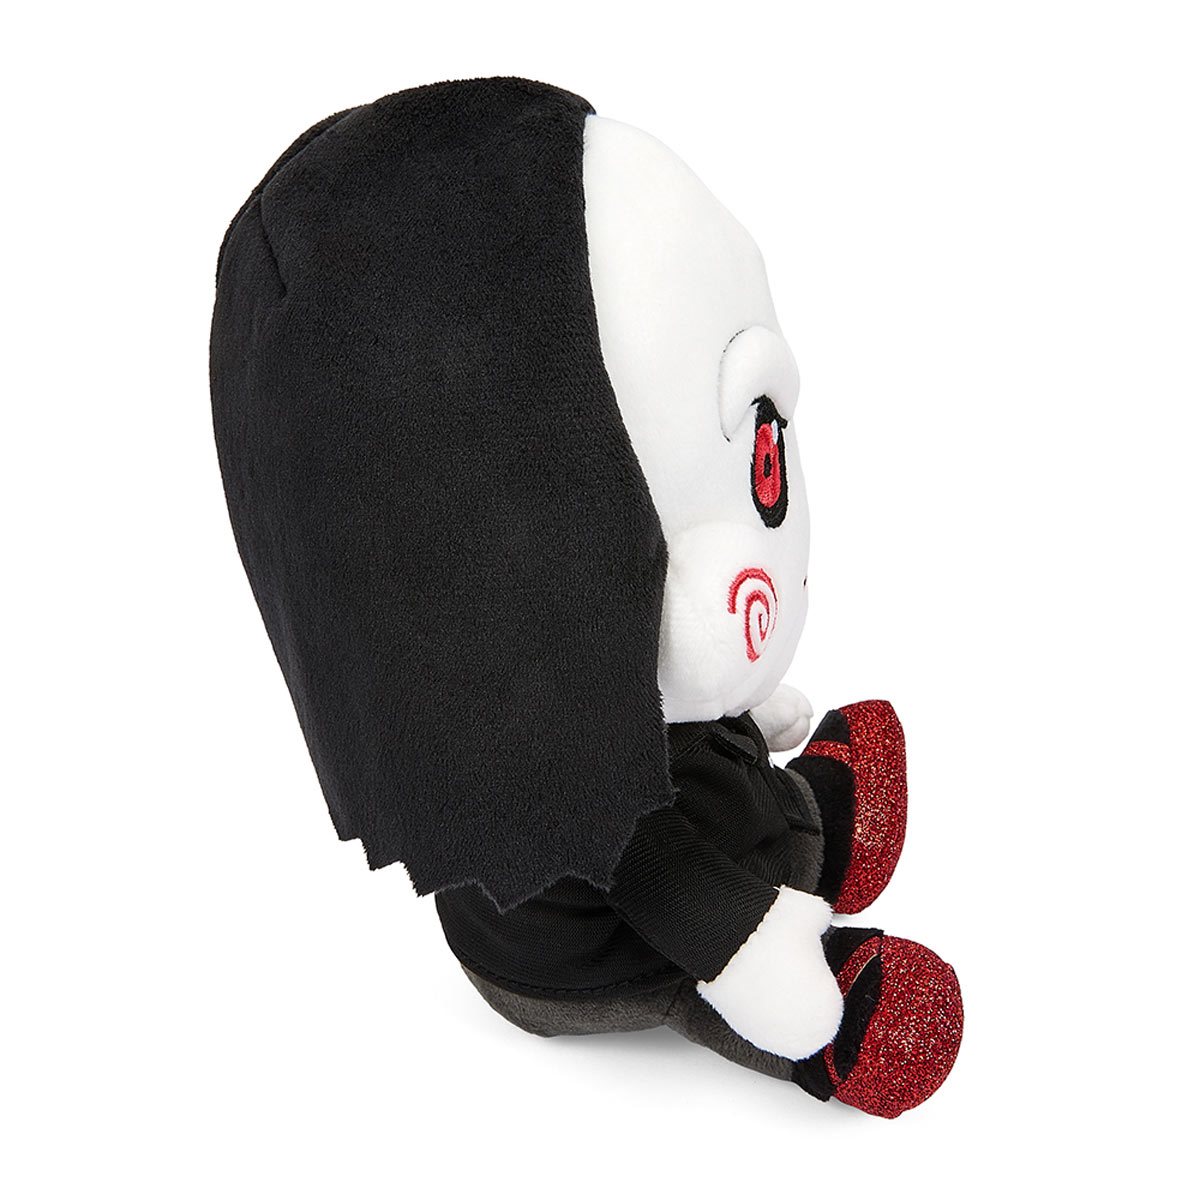 Ghost Face - Glow in The Dark - 8 Roto Phunny Plush